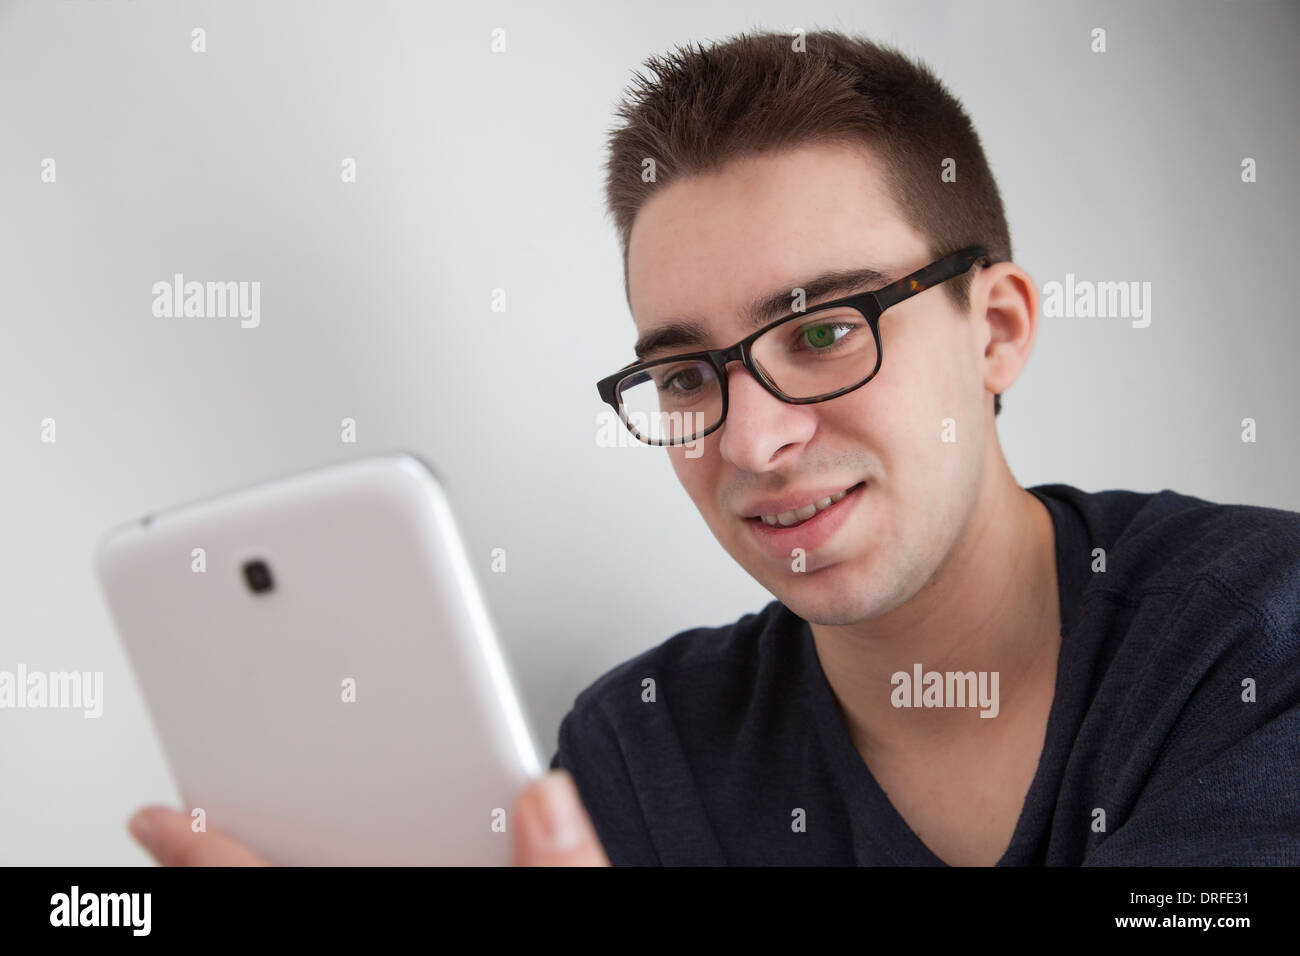 Smiling good looking young man wearing glasses, smiling while holding a white digital tablet. Stock Photo